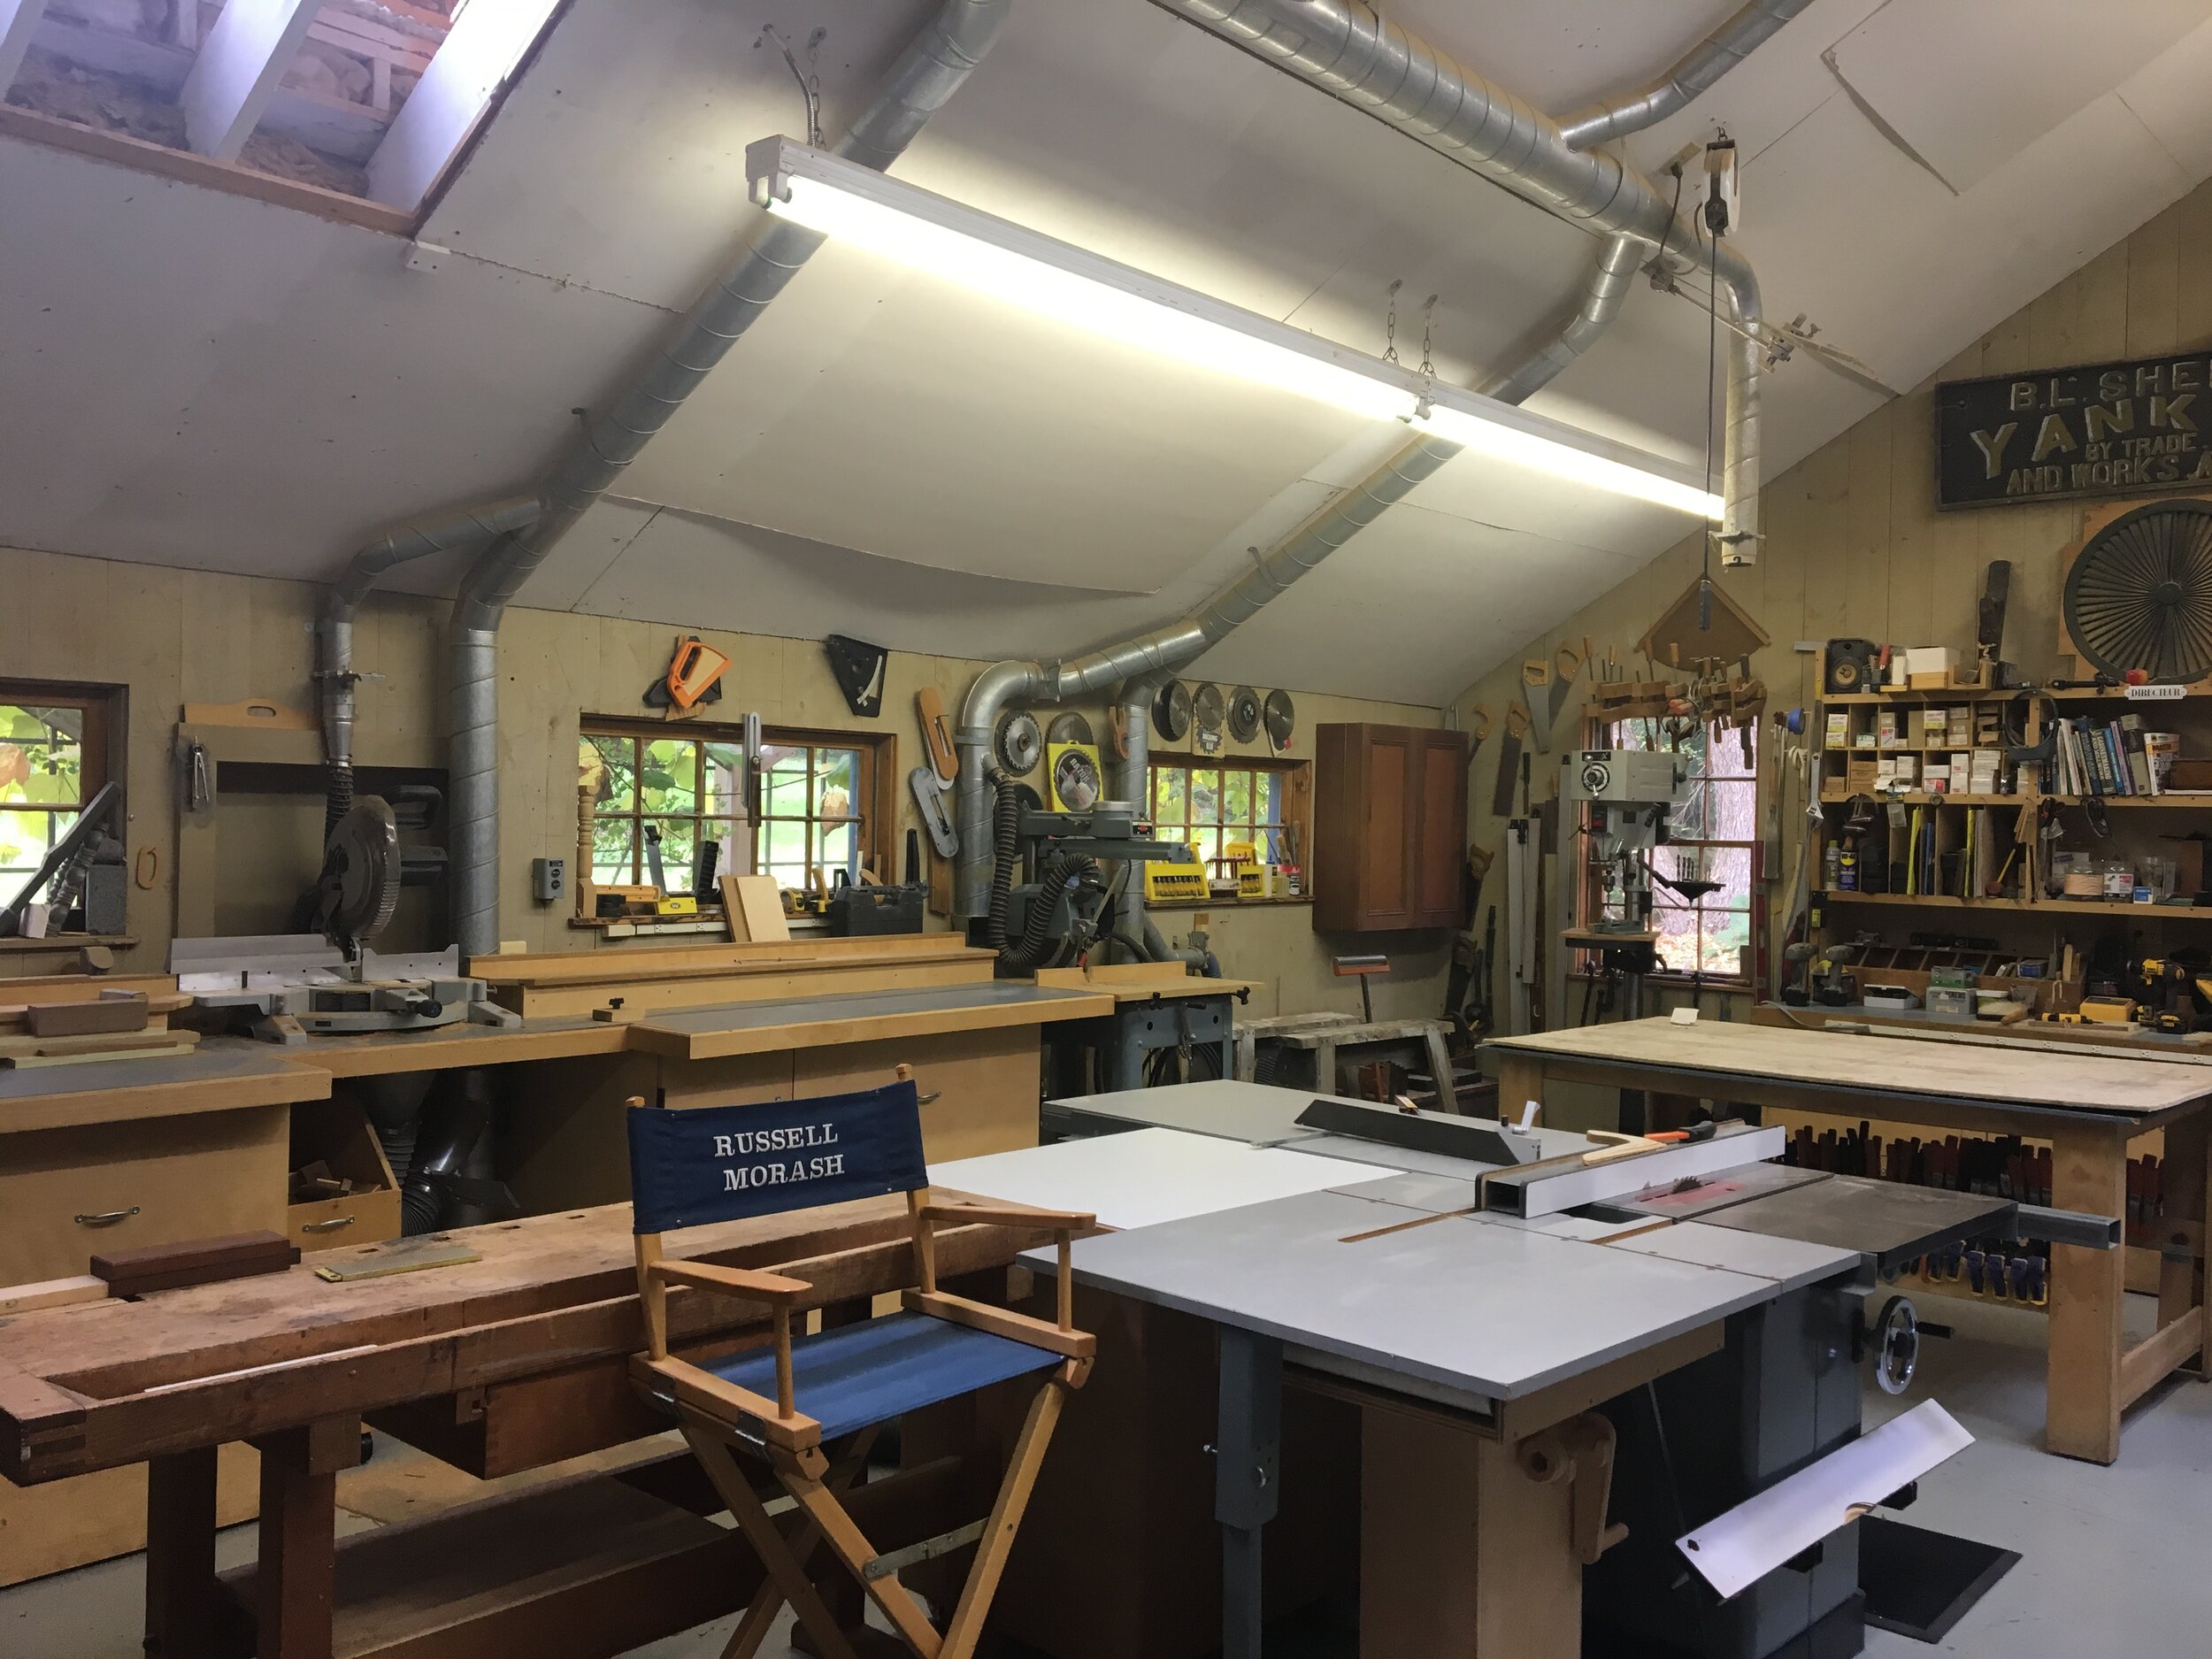 Inside "The New Yankee Workshop." (Photo by author).